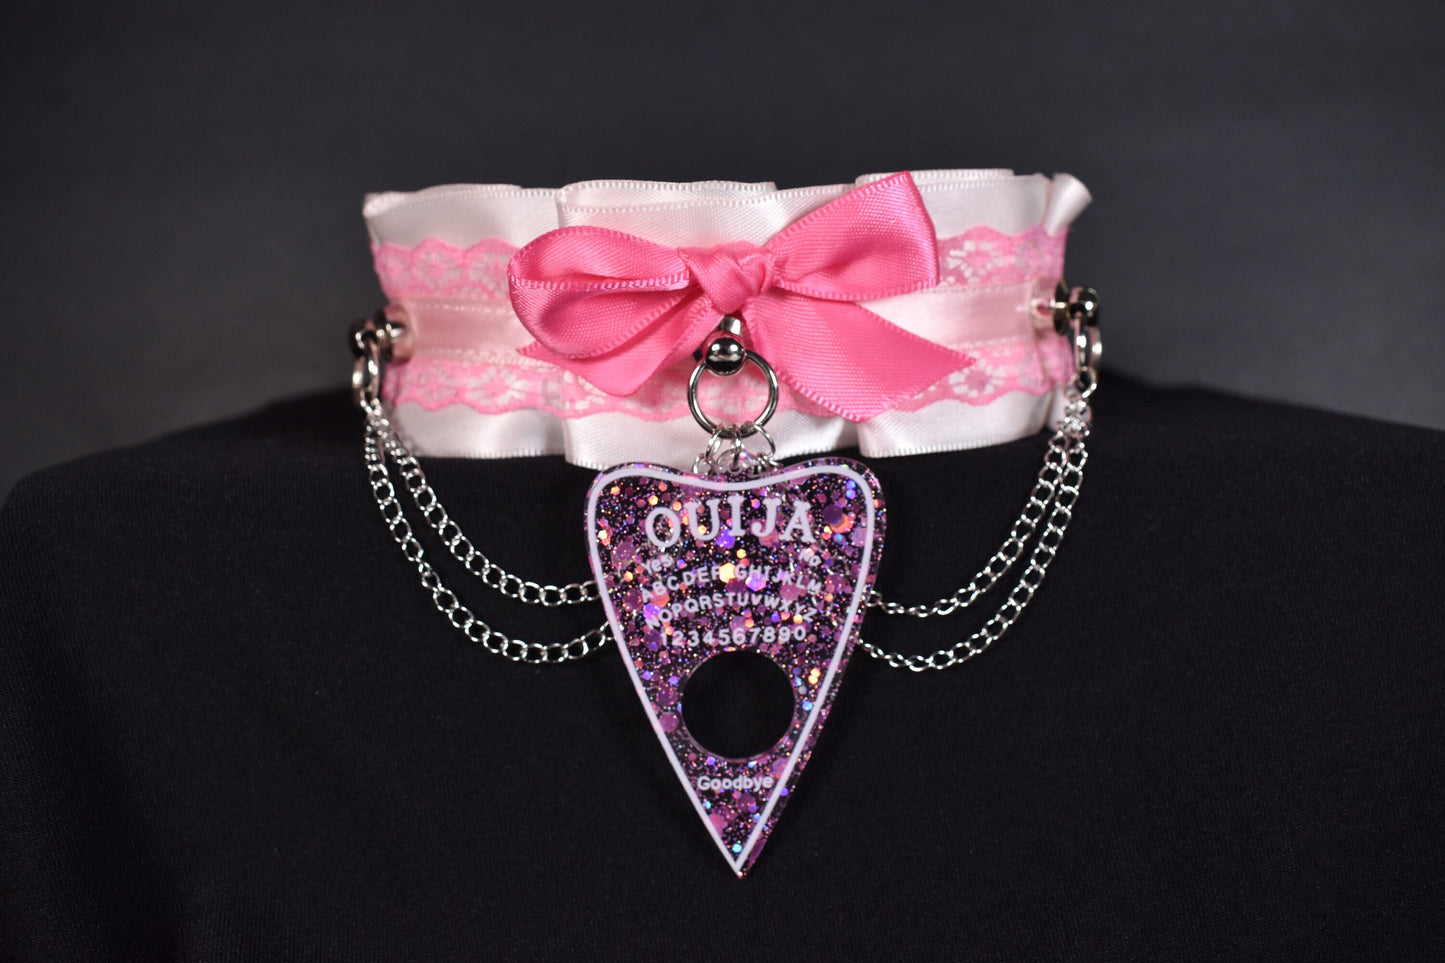 Made to your size / Hot Pink ouija choker / goth / emo / kitten play / alt fashion / bdsm / pet play necklace / kawaii fashion